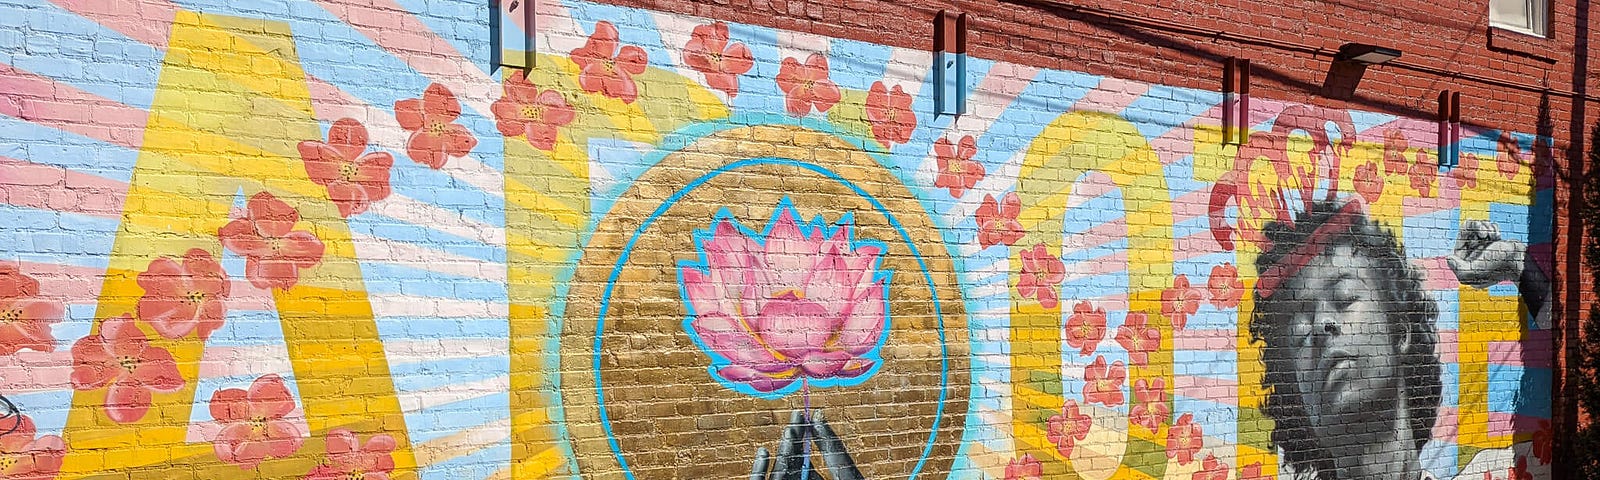 A colorful mural on a brick wall with large yellow letters in the background, a pink flower in the center, and Harry Styles on the right